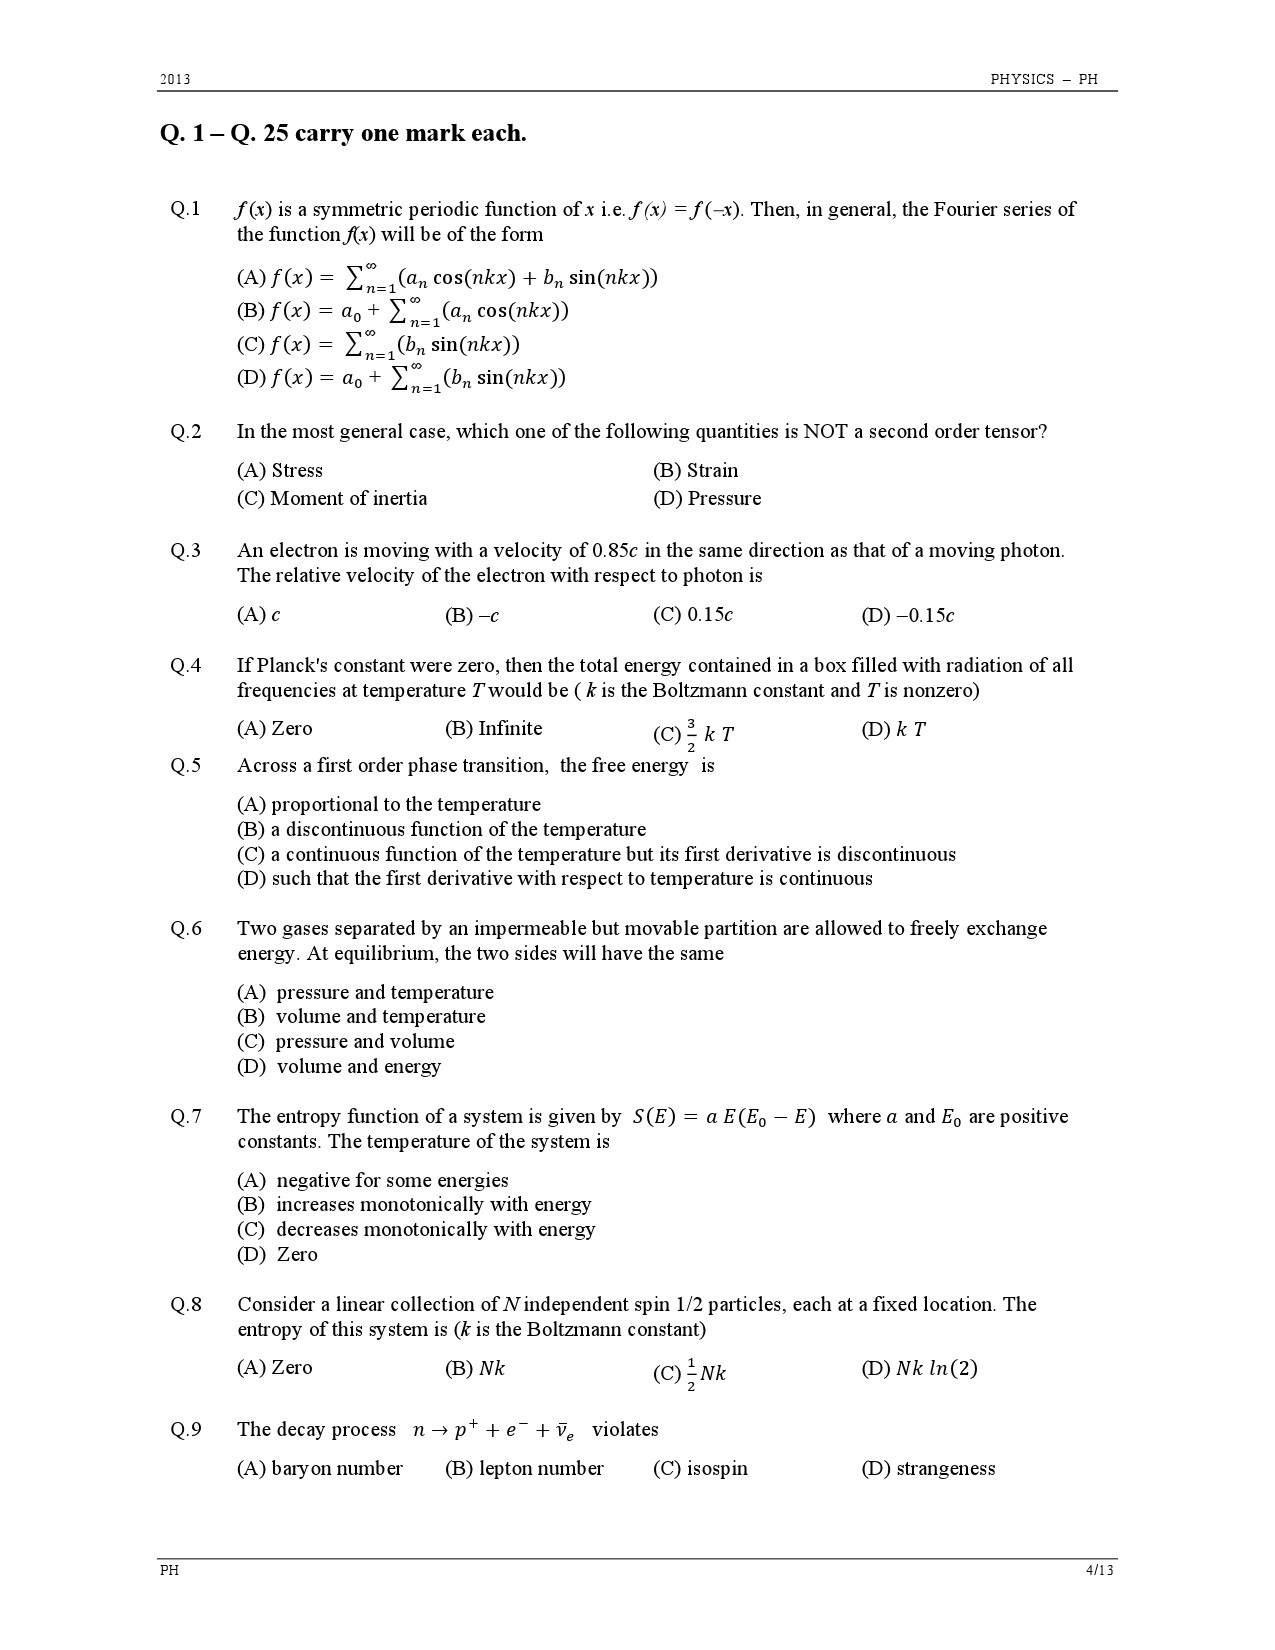 GATE Exam Question Paper 2013 Physics 4